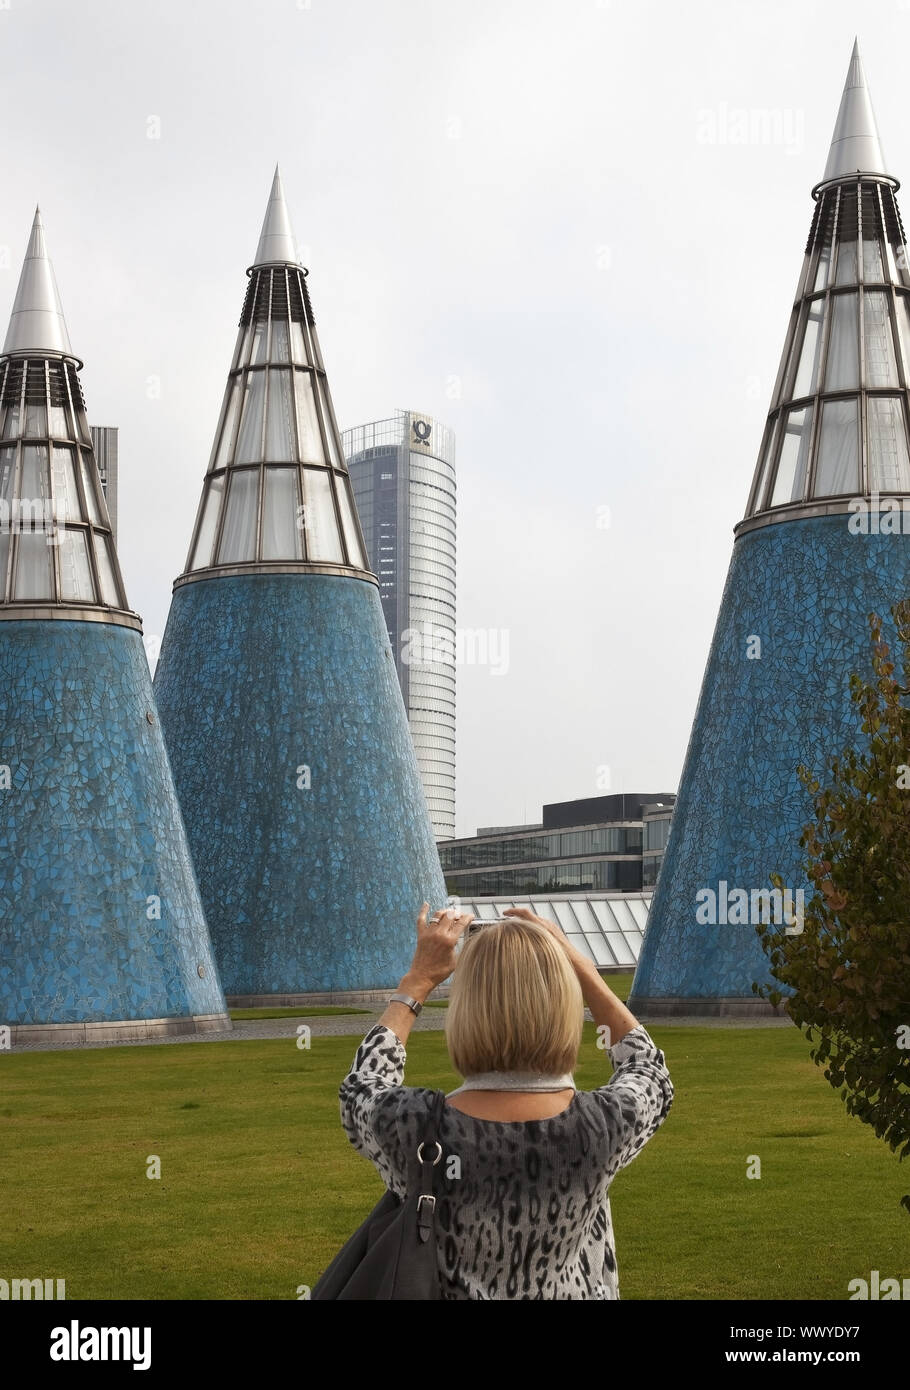 woman taking pictures of the concical light wells of the Art and Exhibition Hall, Bonn, Germany Stock Photo